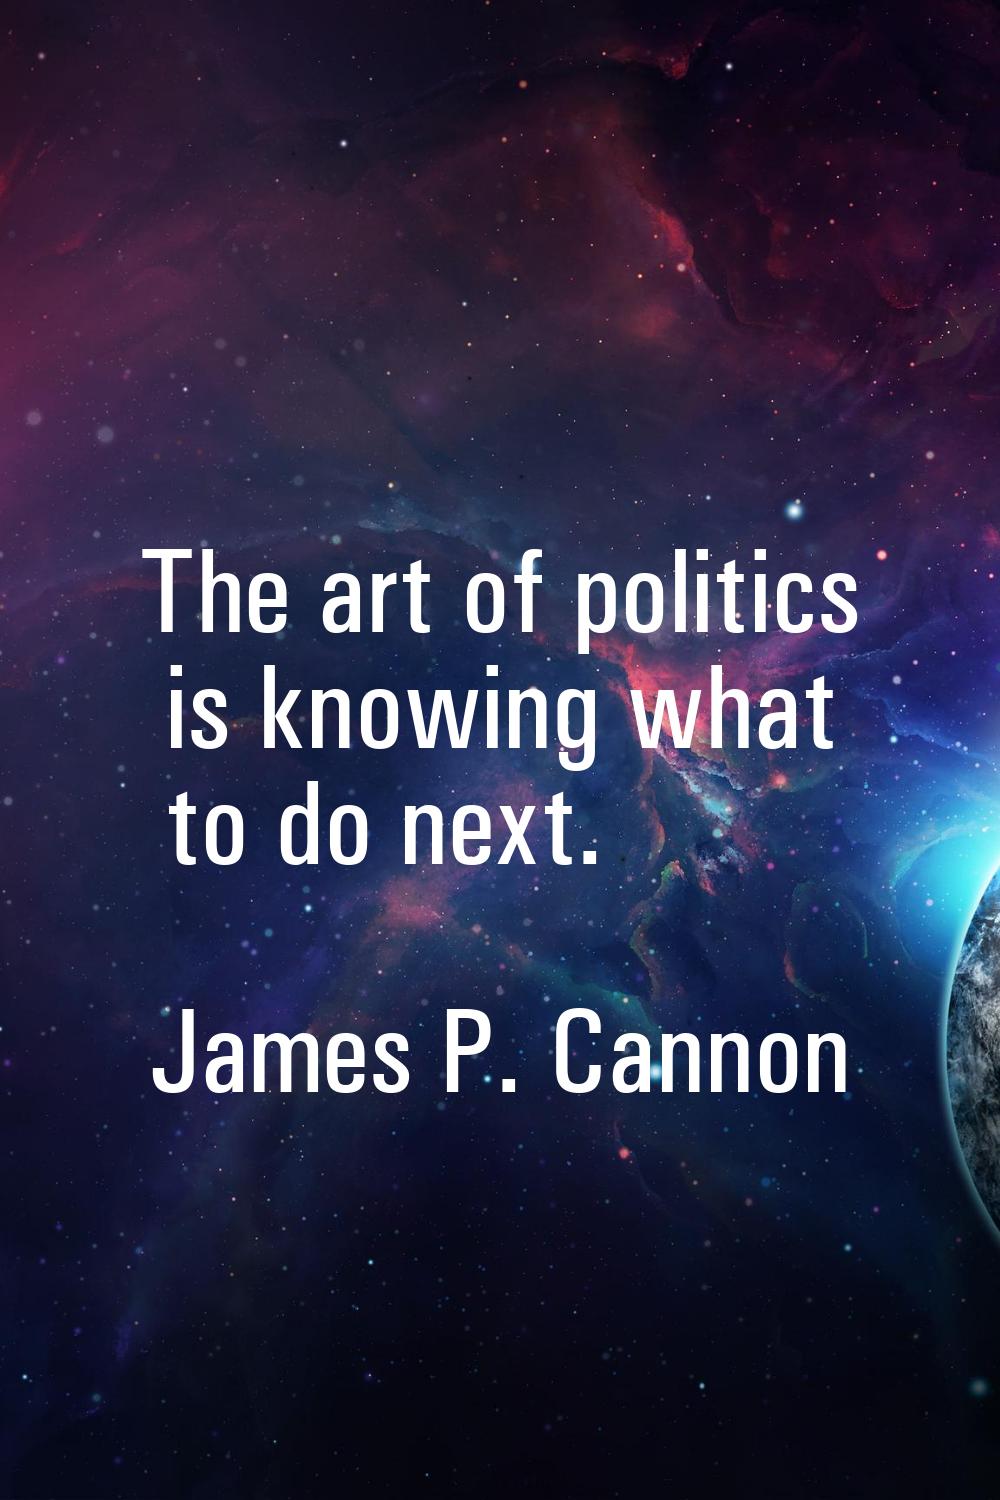 The art of politics is knowing what to do next.